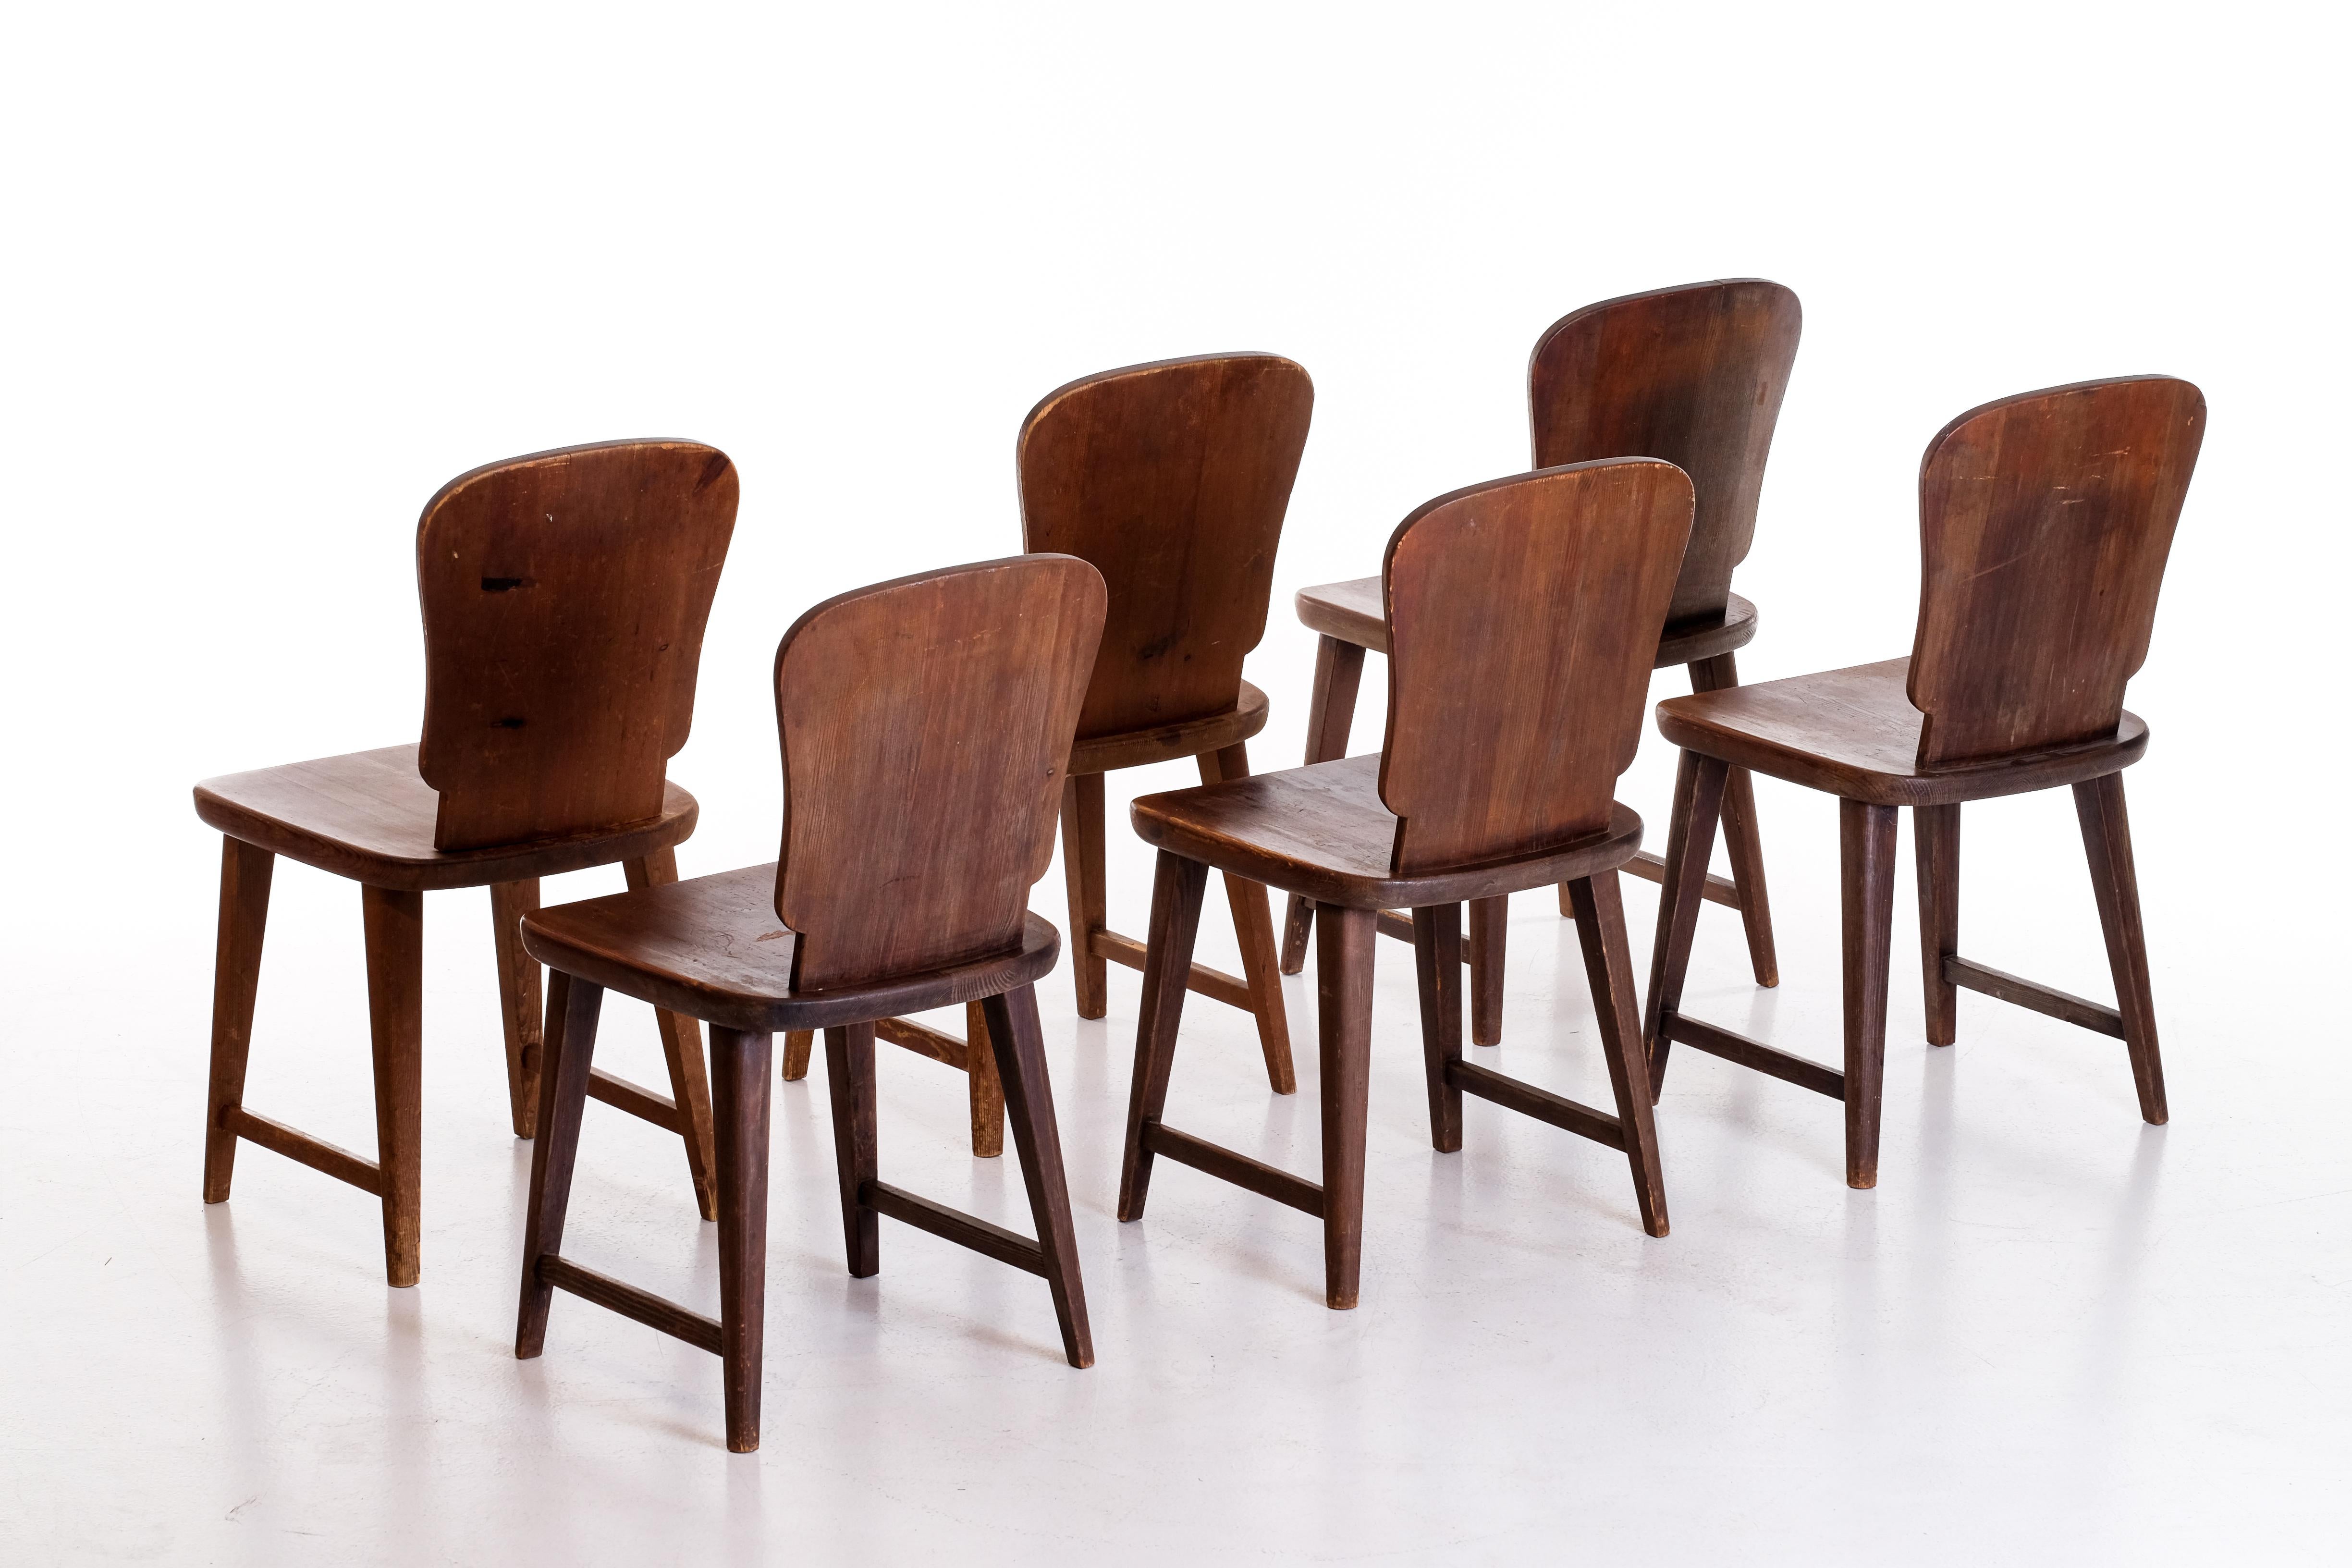 Mid-20th Century Rare Set of 6 Swedish Pine Chairs, 1940s For Sale